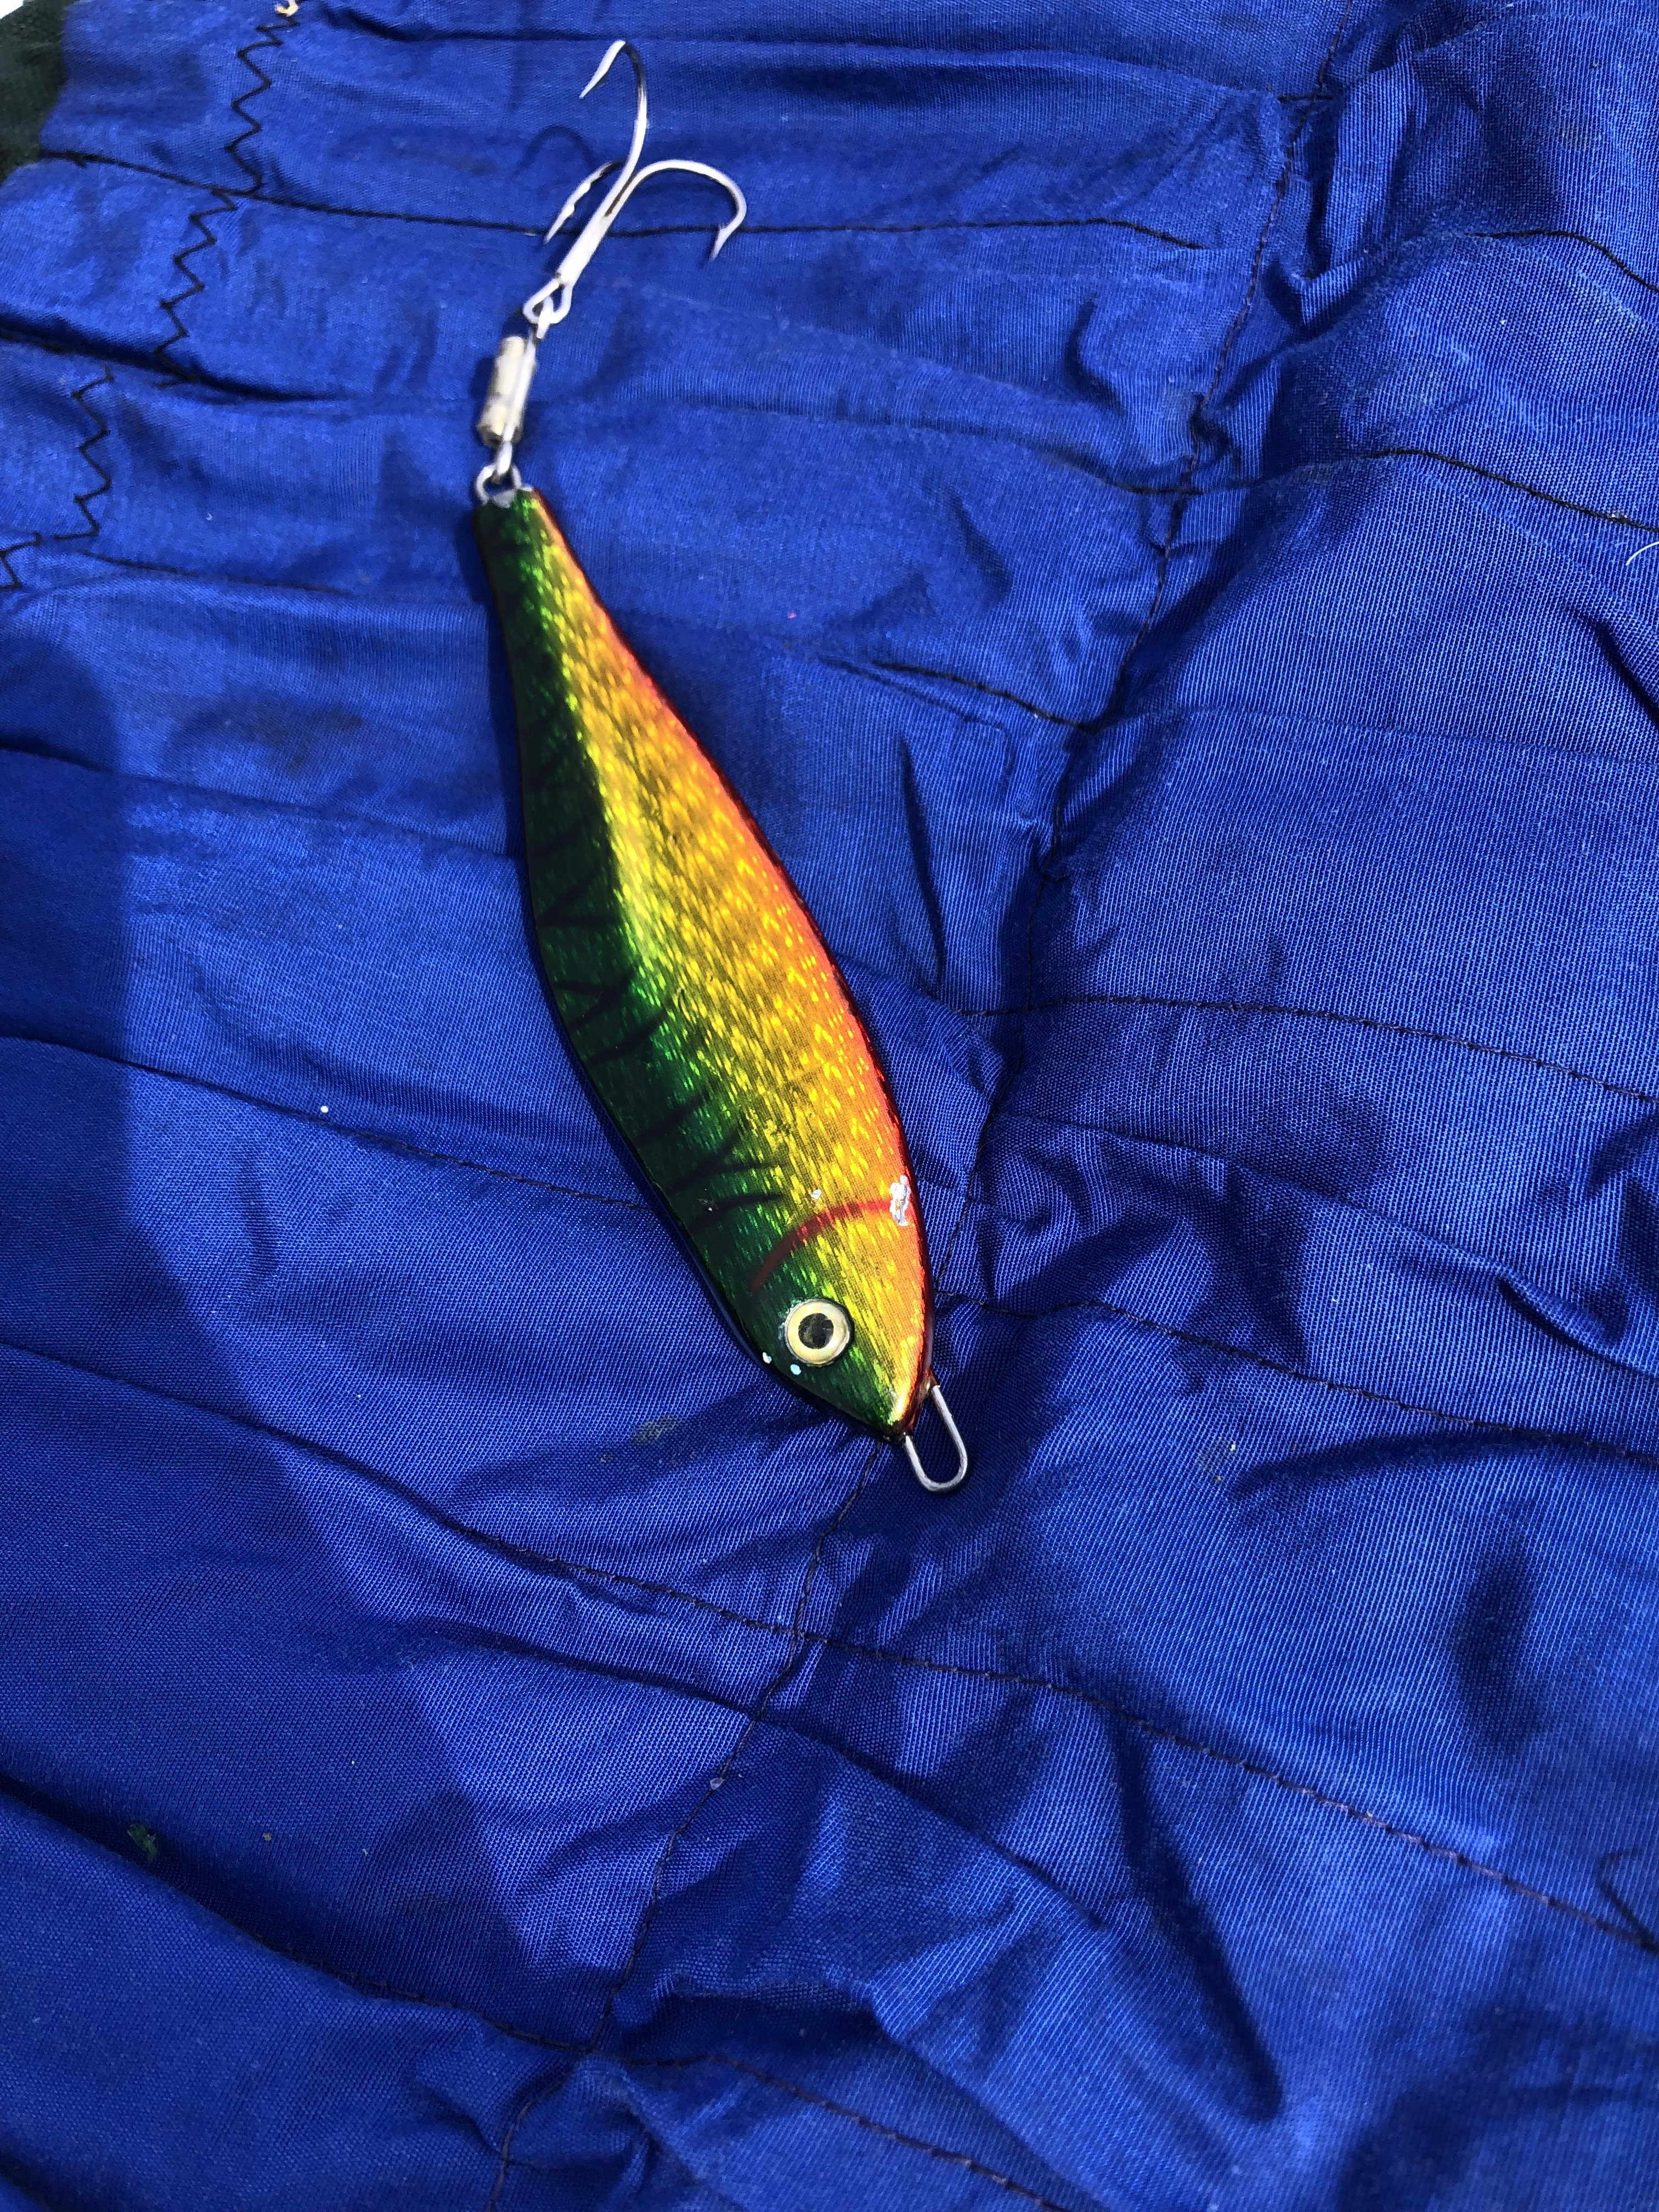 a particularly attractive lead jigging lure.jpeg